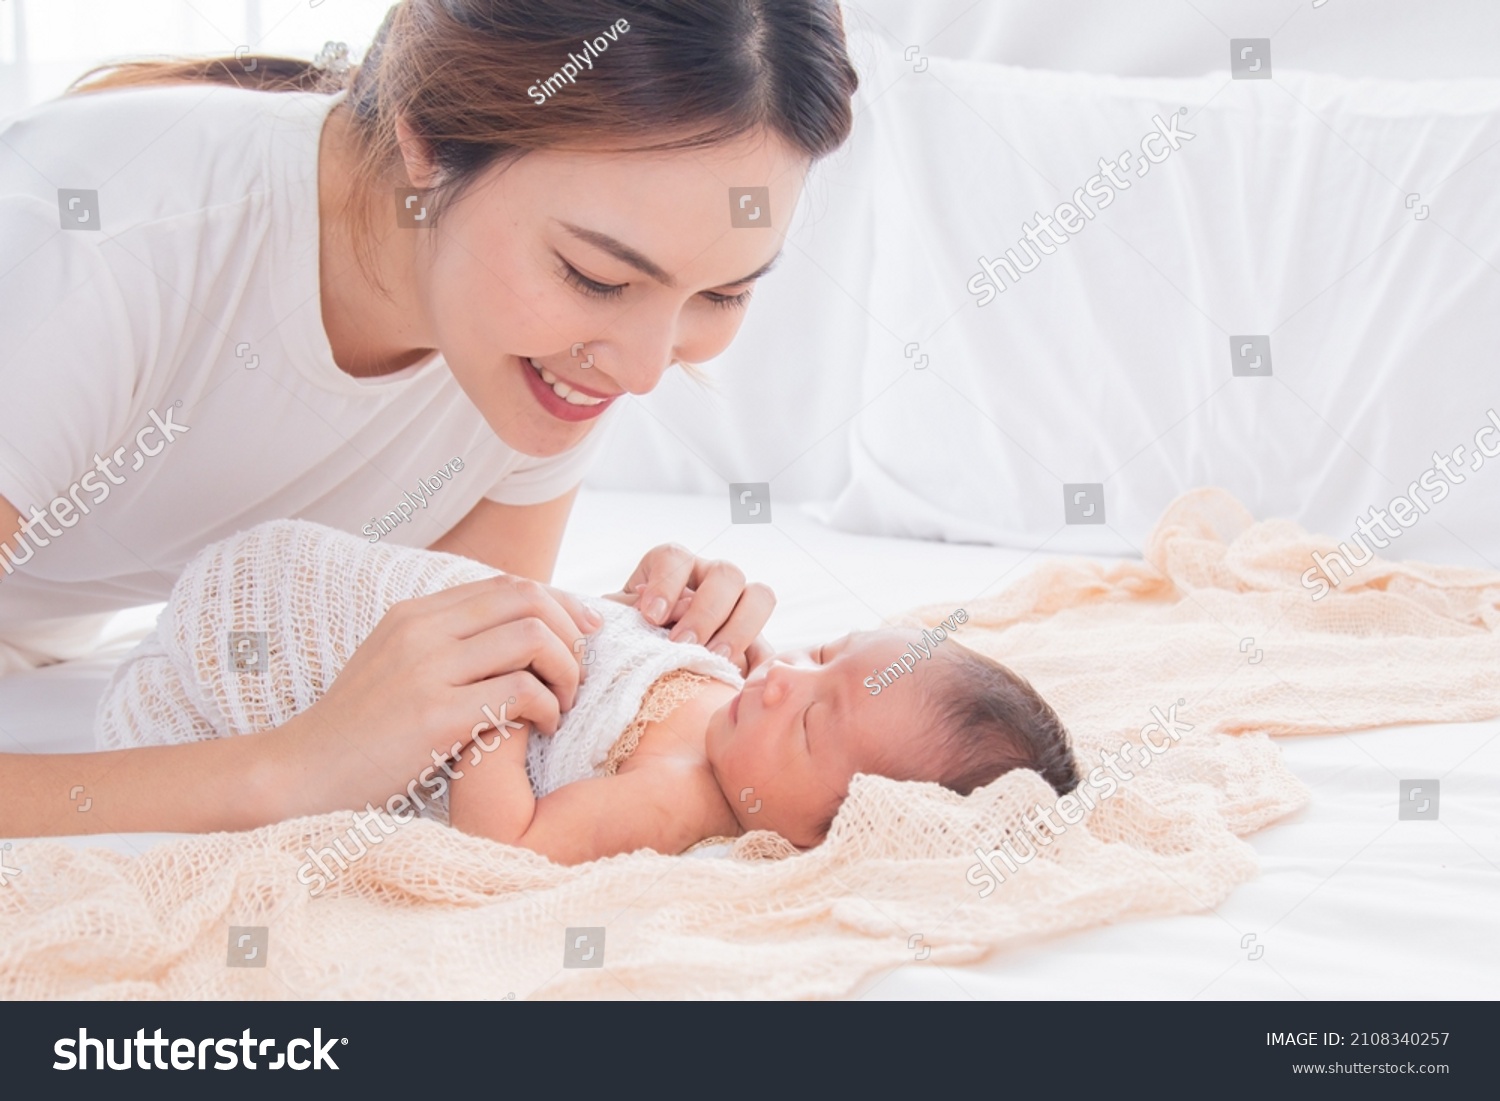 Selective focus of Asian young mother swaddling baby on bed, Beautiful woman wrapping adorable infant in thin cloth. Cute newborn child taking nap after bath. Concept of baby care and family. #2108340257